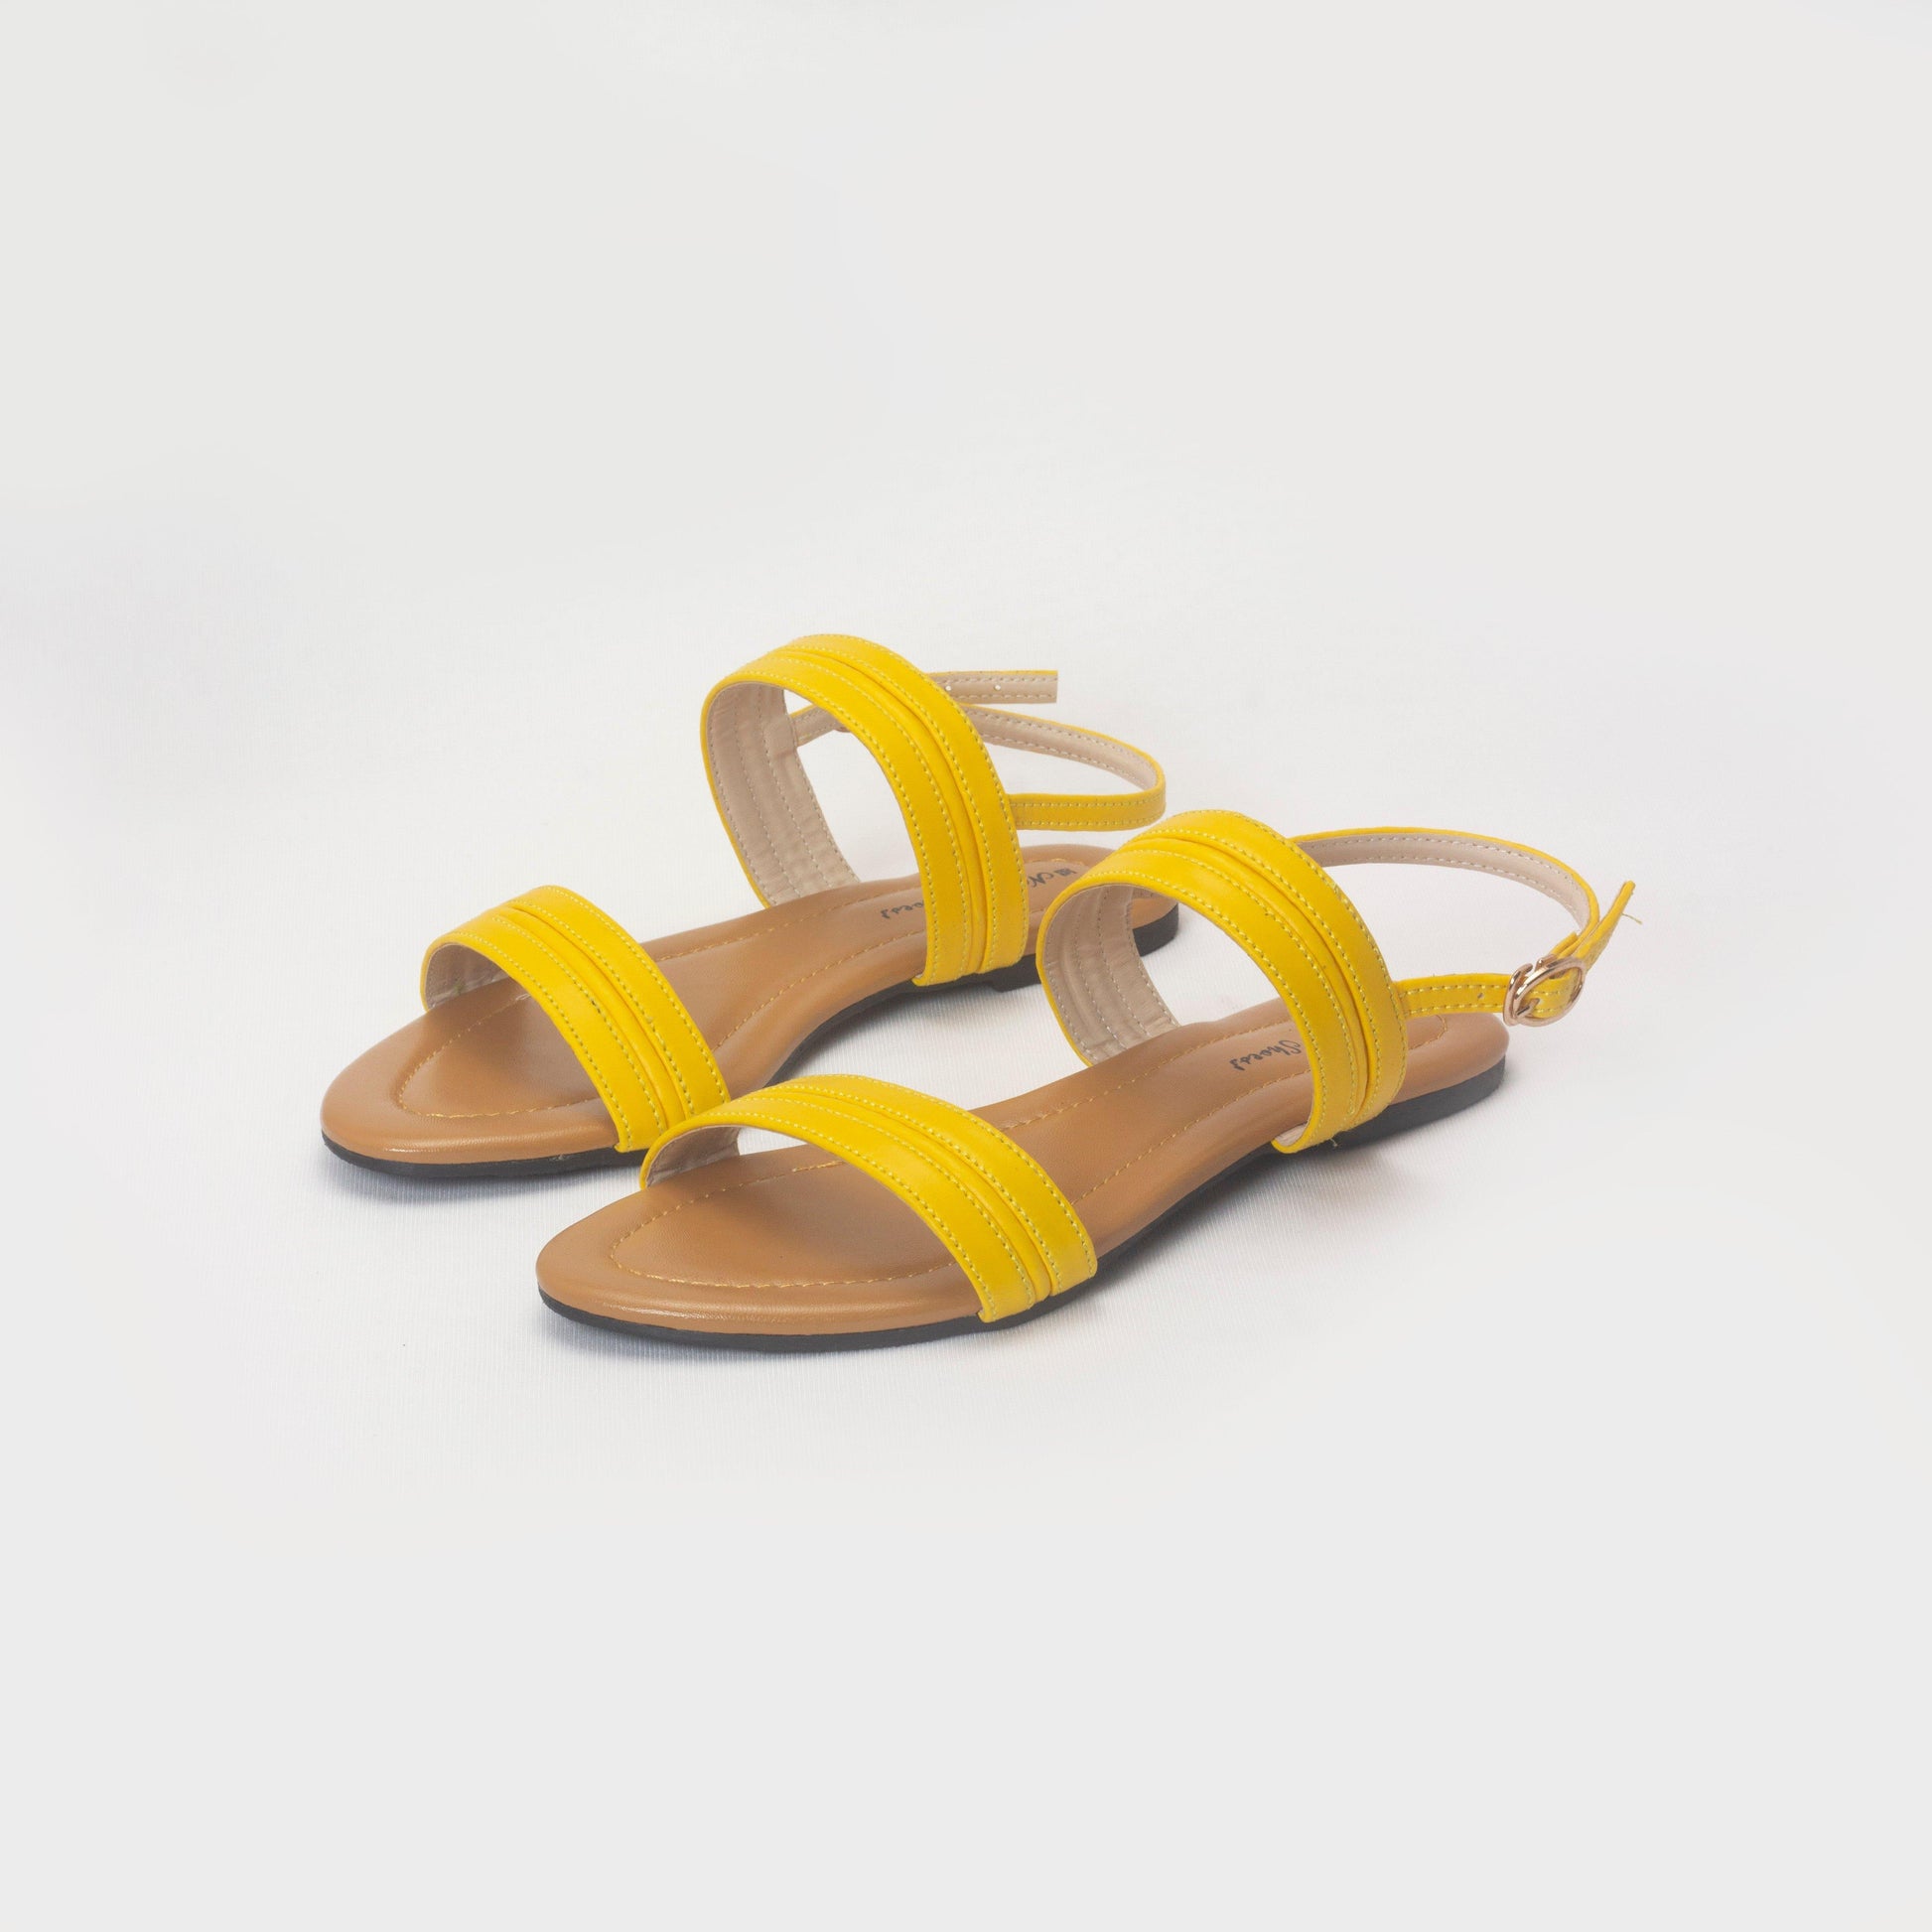 Nawabi Shoes BD Shoes 35 / yellow Comfortable and Stylish Flat Sandals for Women